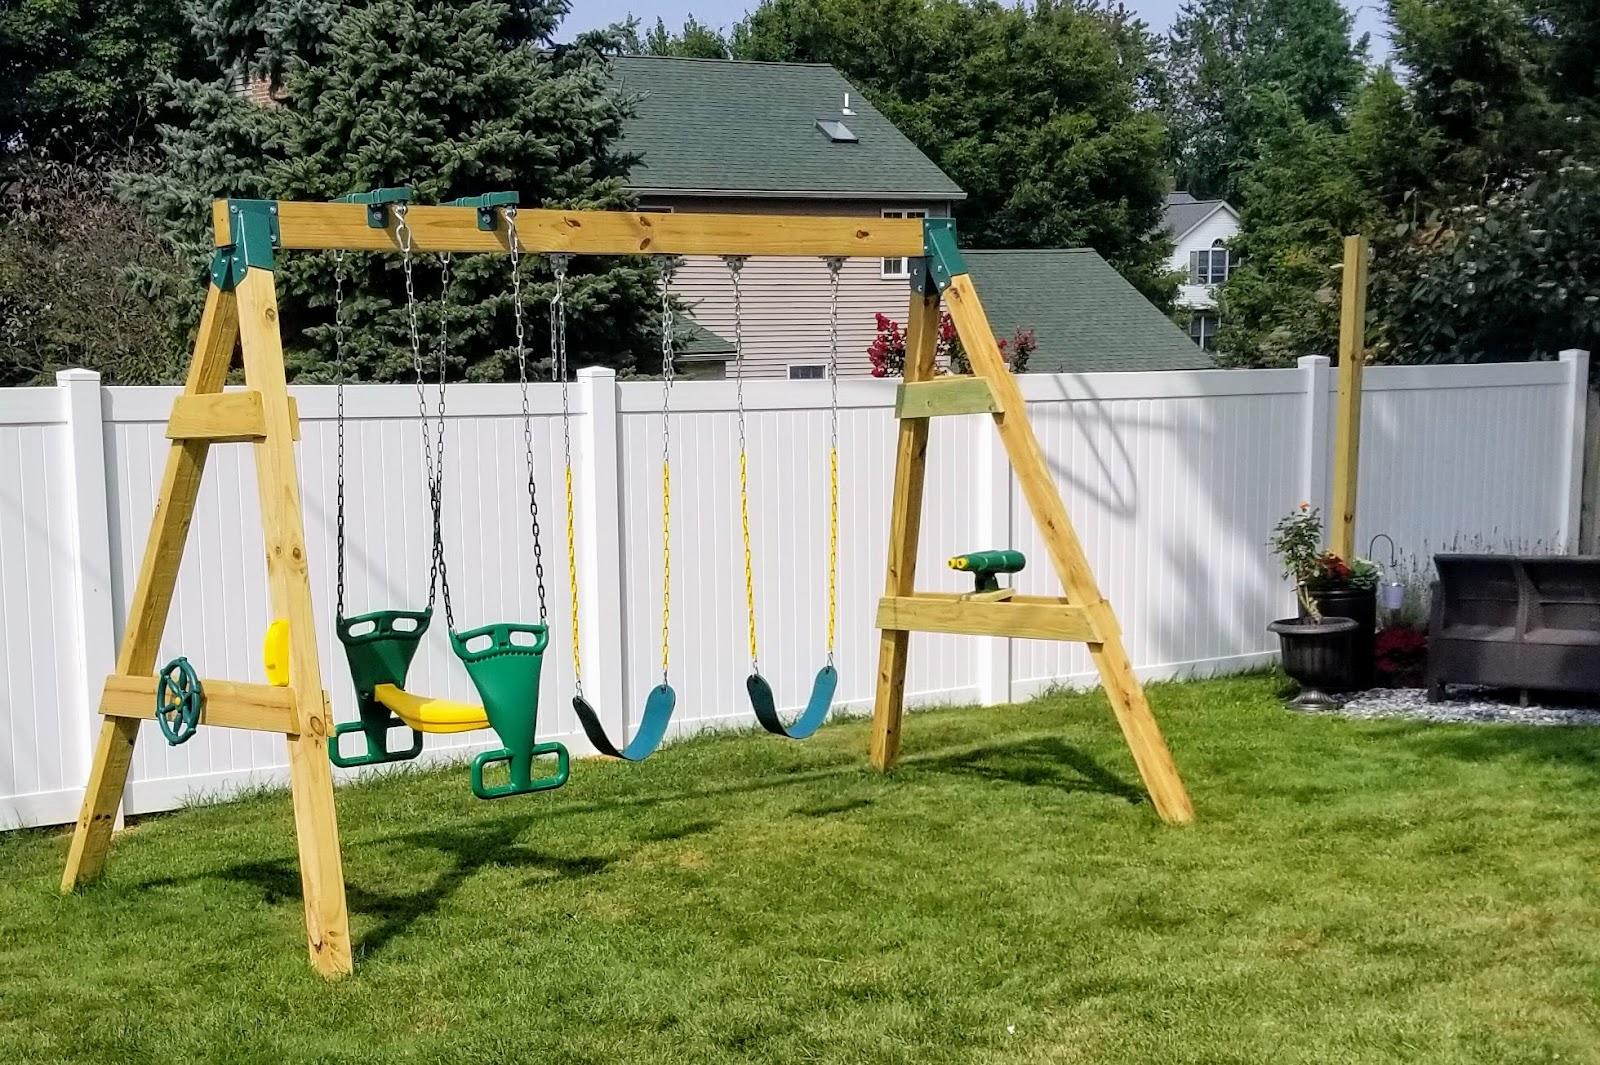 Avoid the high price tag of pre-assembled swing sets, and learn how to build a backyard swing set for cheap with this idea for kids!